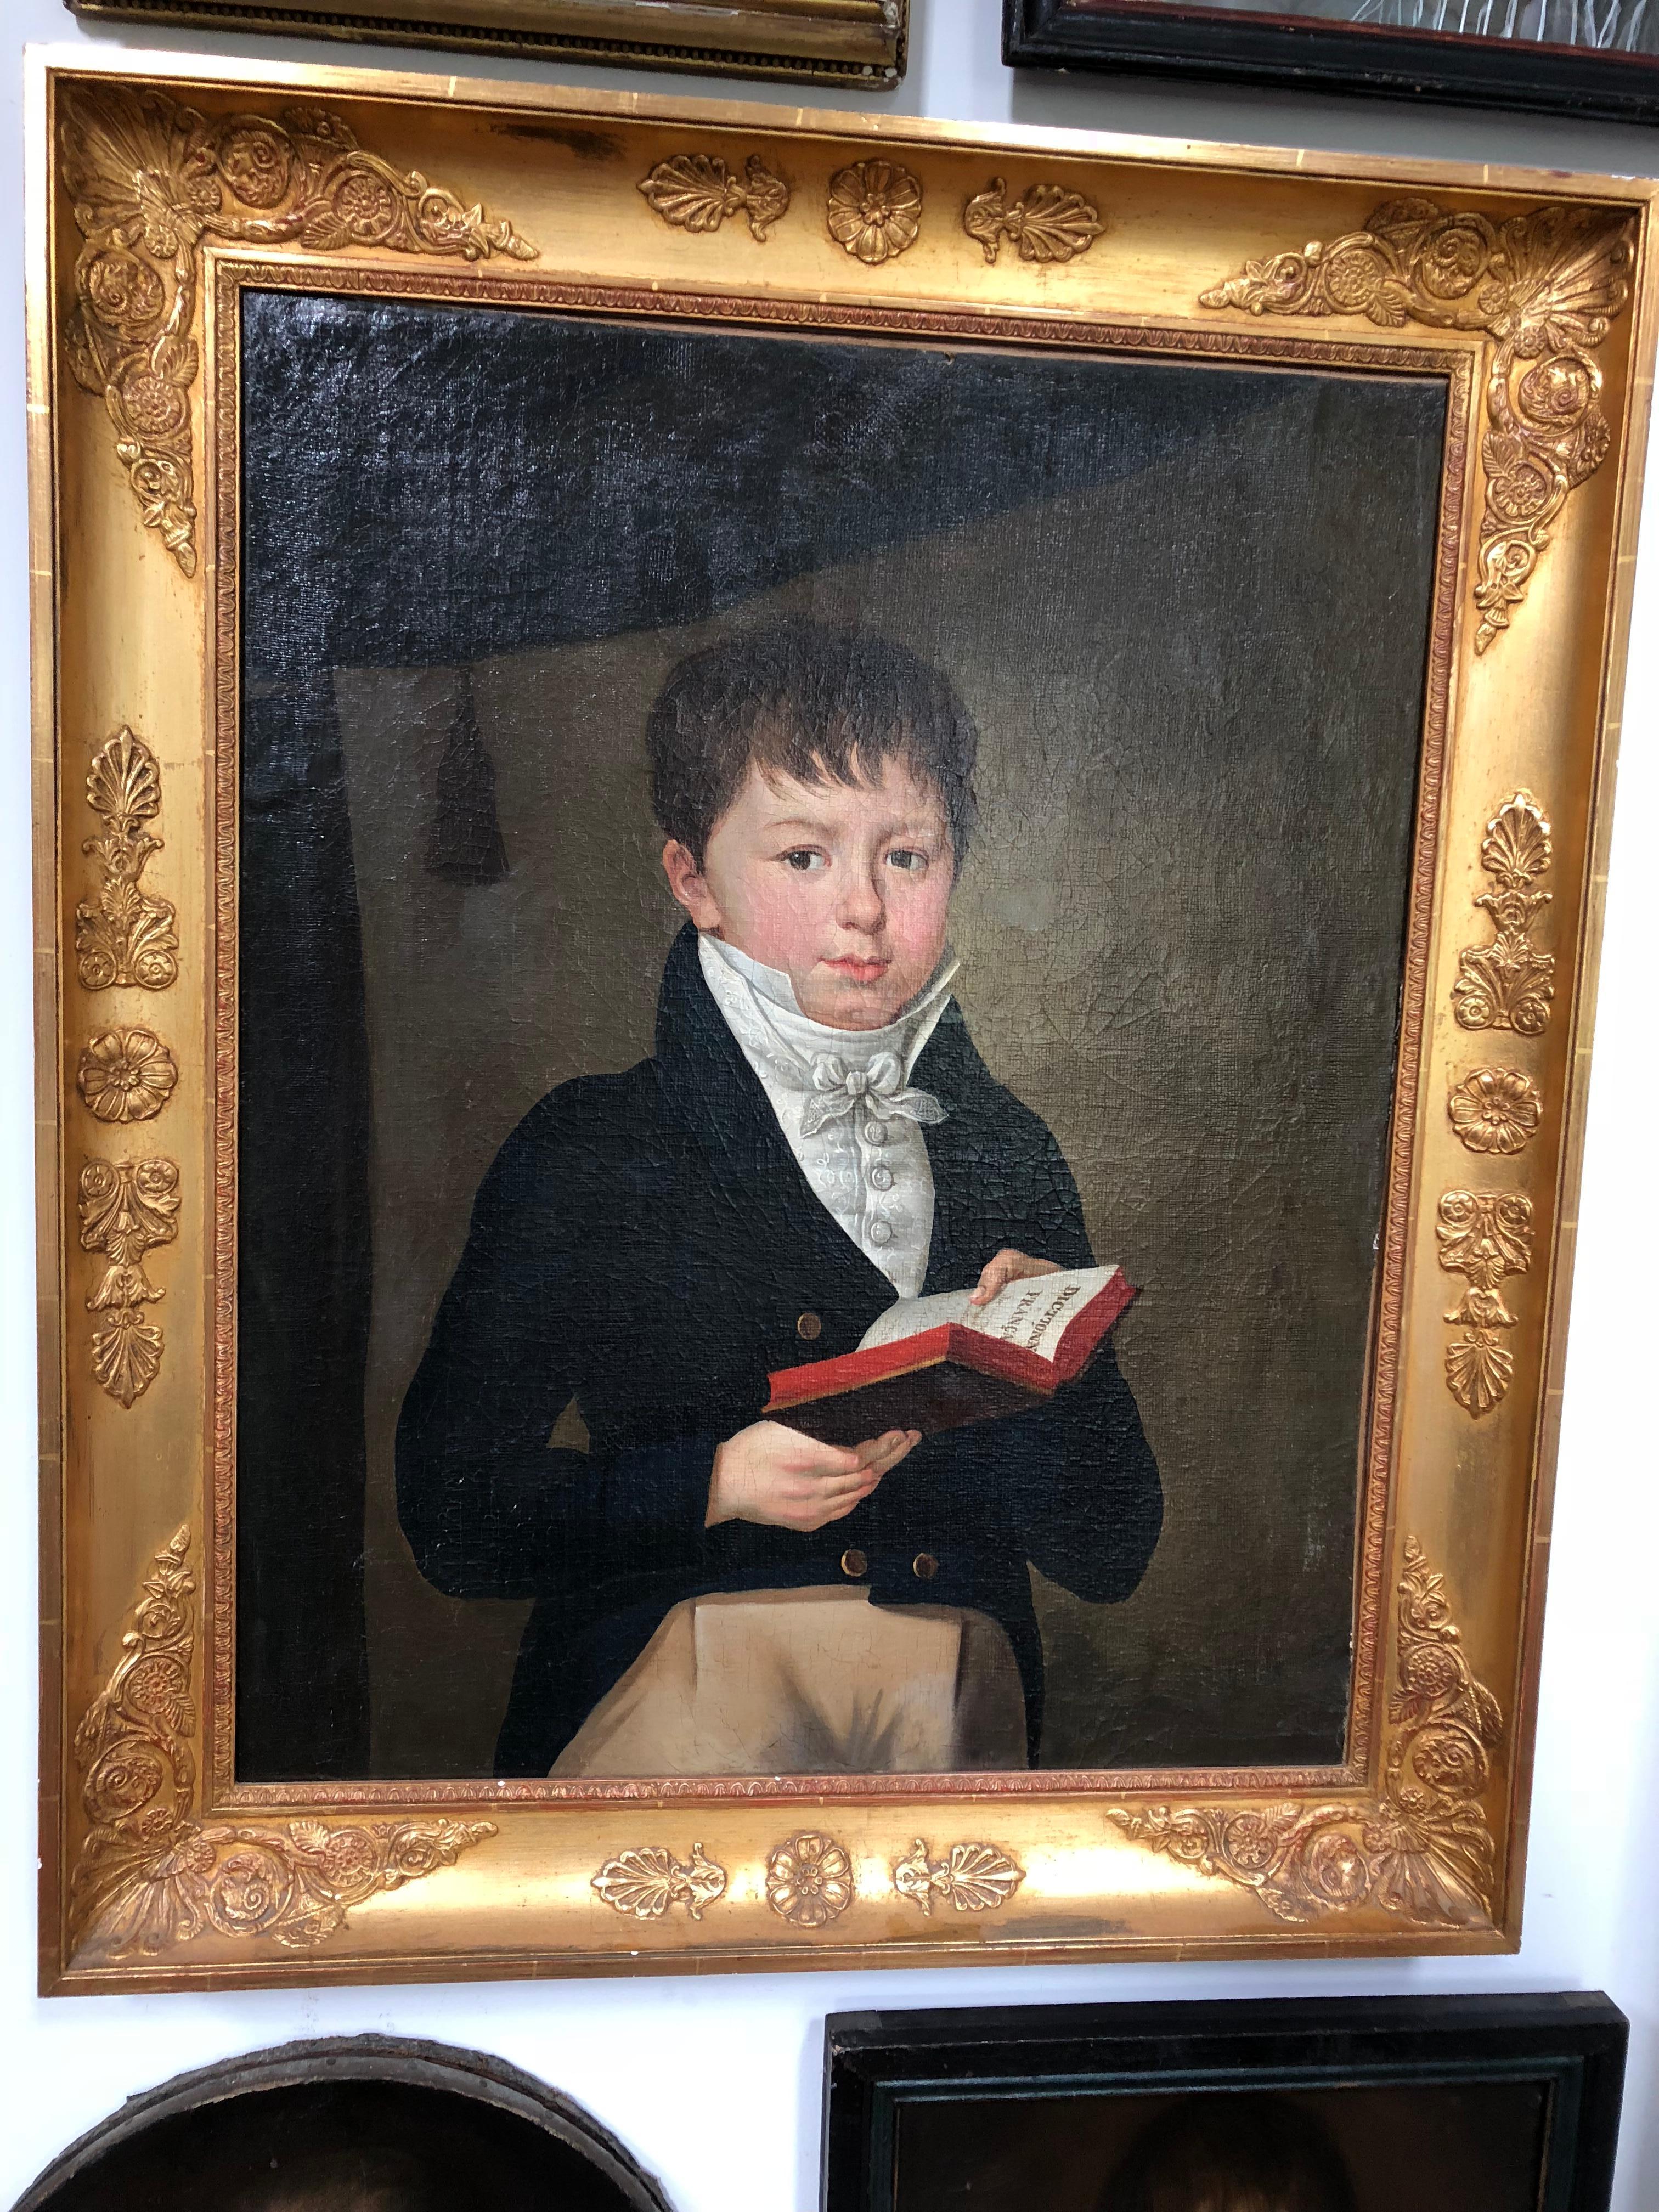 A fine, lifesize oil-on-canvas portrait of a young boy dressed in period attire, holding a book titled “Dictionaire de France” In a period appropriate giltwood frame. Empire period, circa 1810, France. Provenance: from the estate of Pierre Moulin,